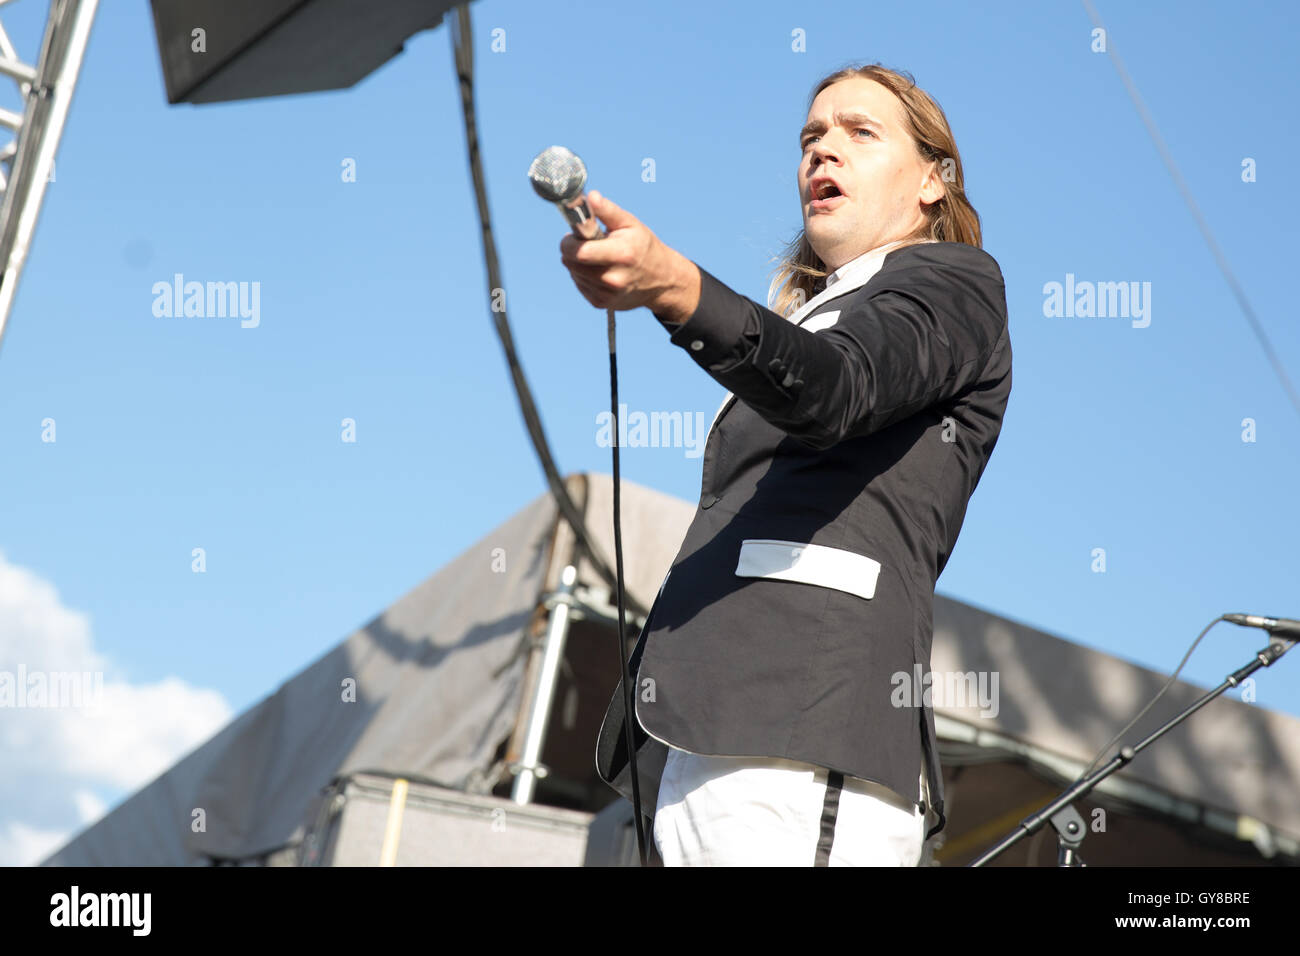 Chicago, Illinois, USA. 17th Sep, 2016. HOWLIN' PELLE ALMQVIST (PER ALMQVIST) of The Hives performs live at Douglas Park during Riot Fest in Chicago, Illinois Credit:  Daniel DeSlover/ZUMA Wire/Alamy Live News Stock Photo